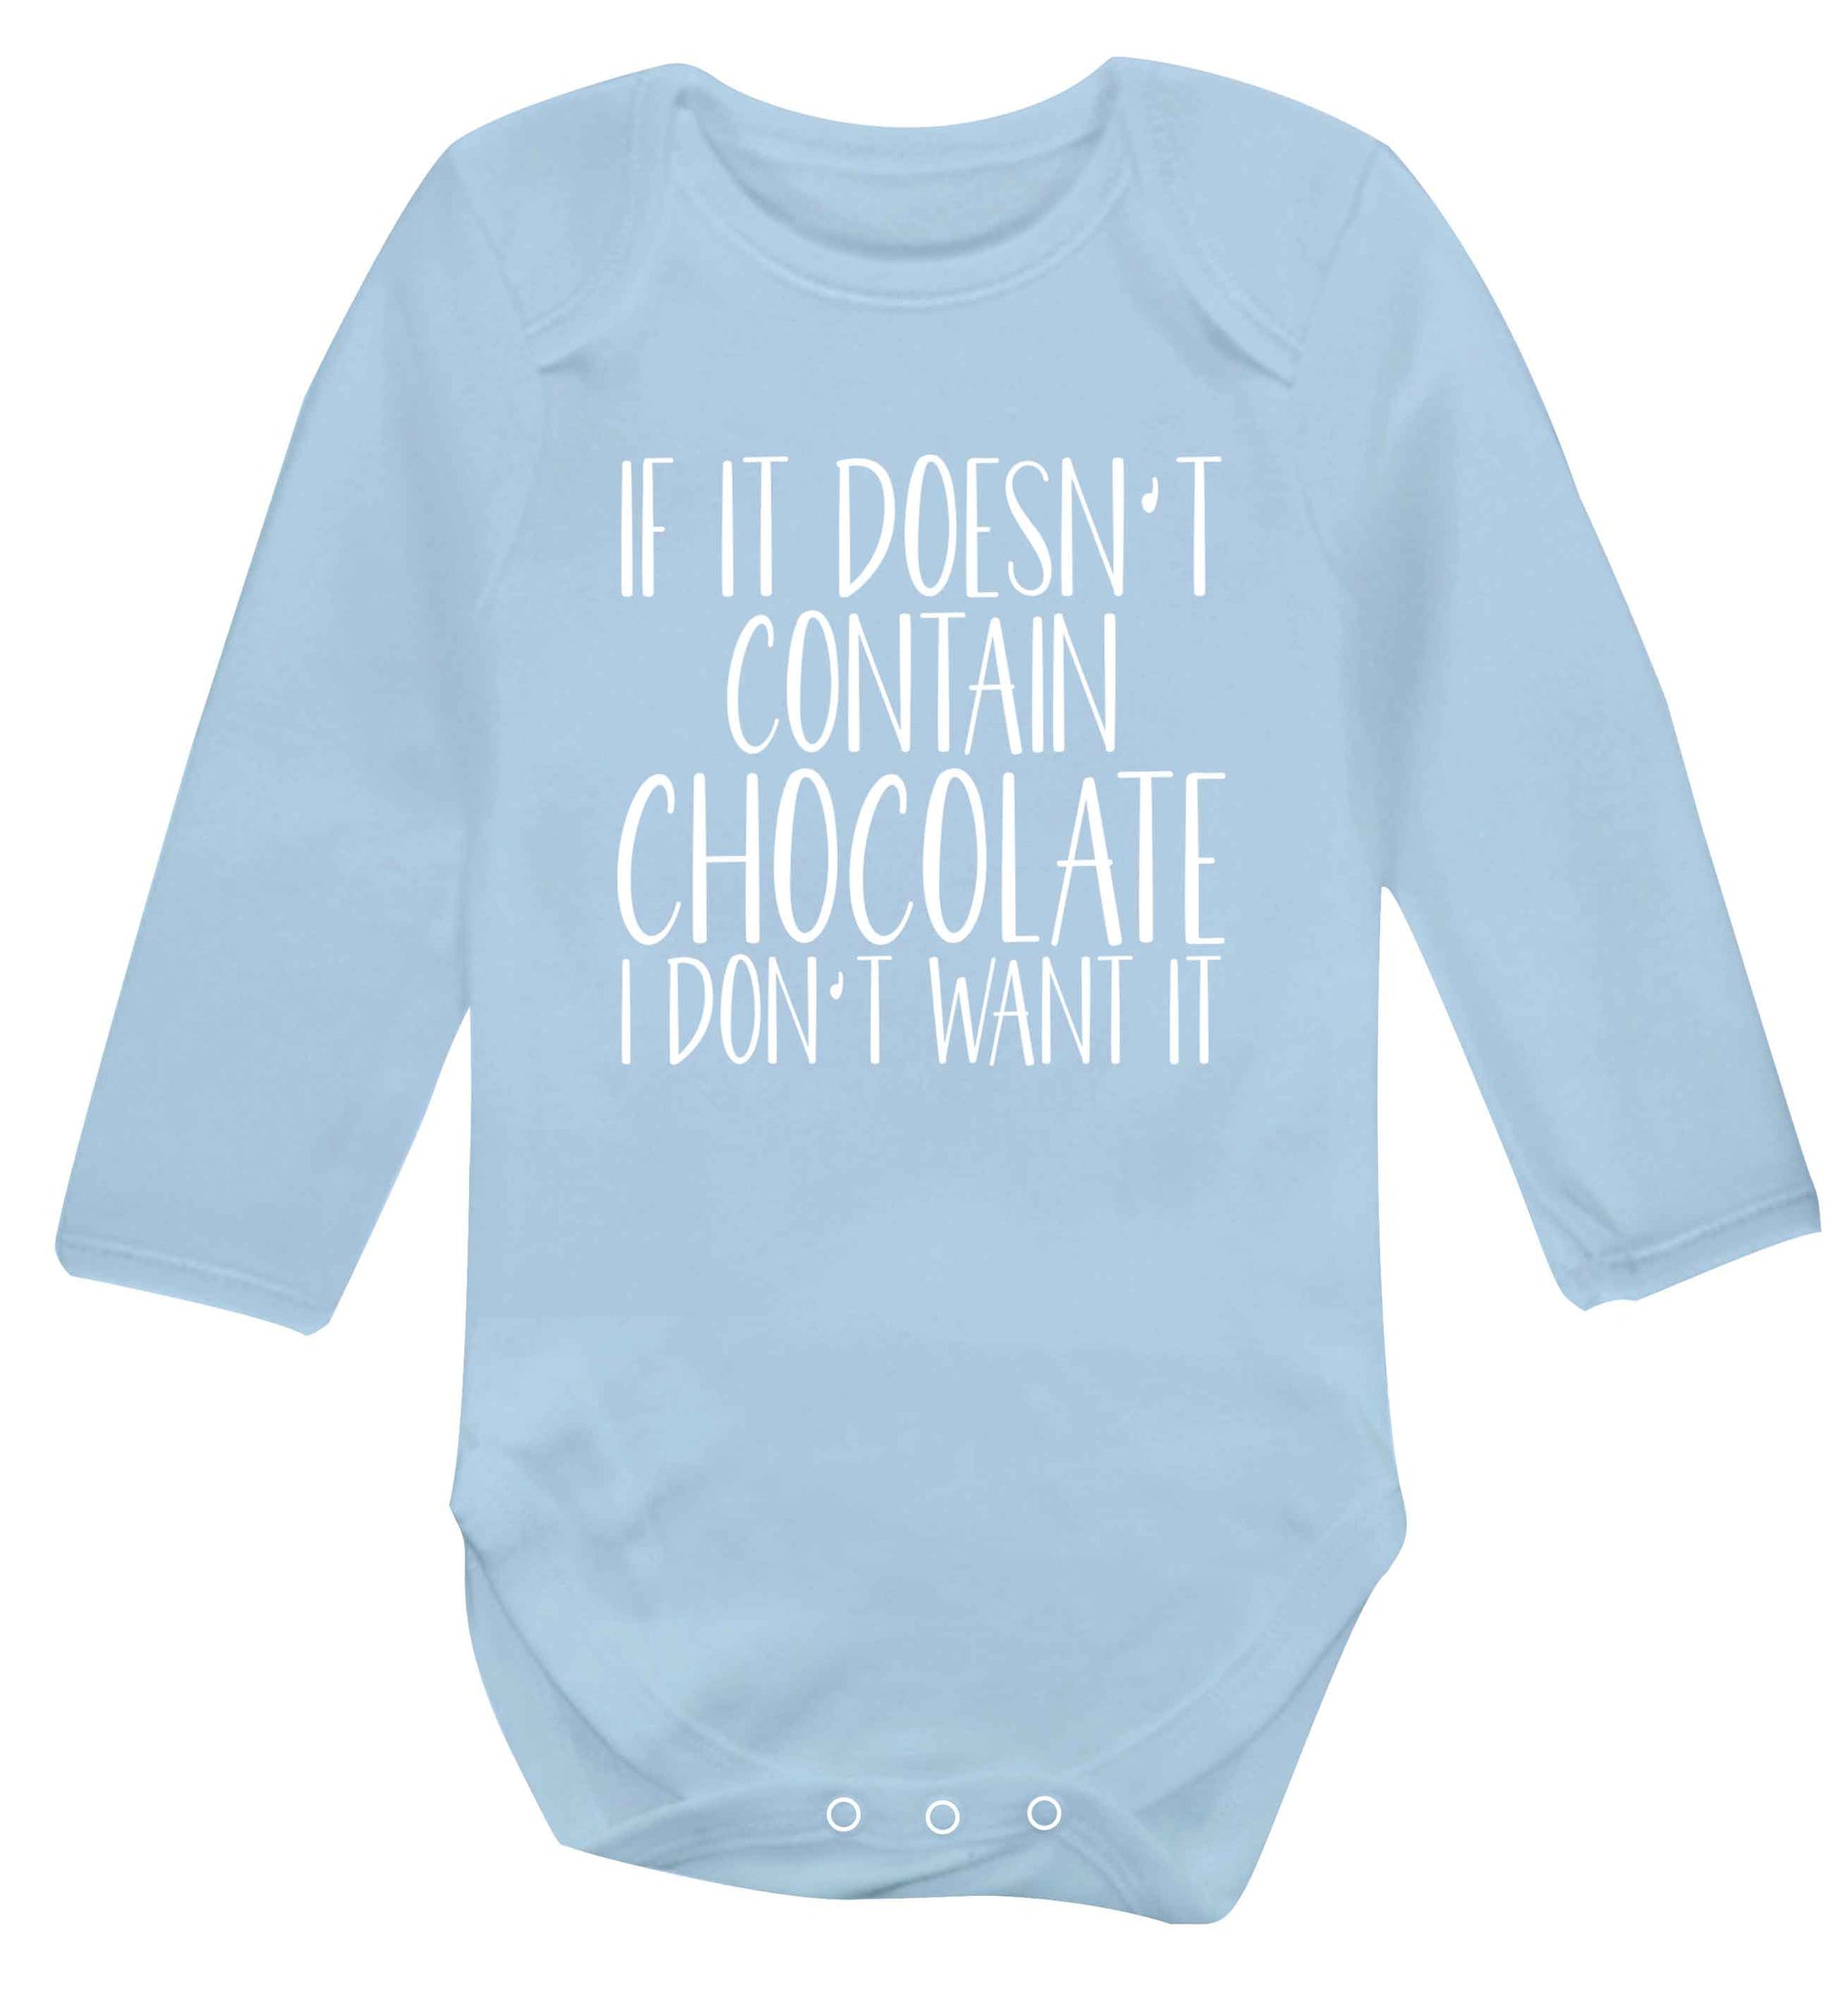 If it doesn't contain chocolate I don't want it baby vest long sleeved pale blue 6-12 months